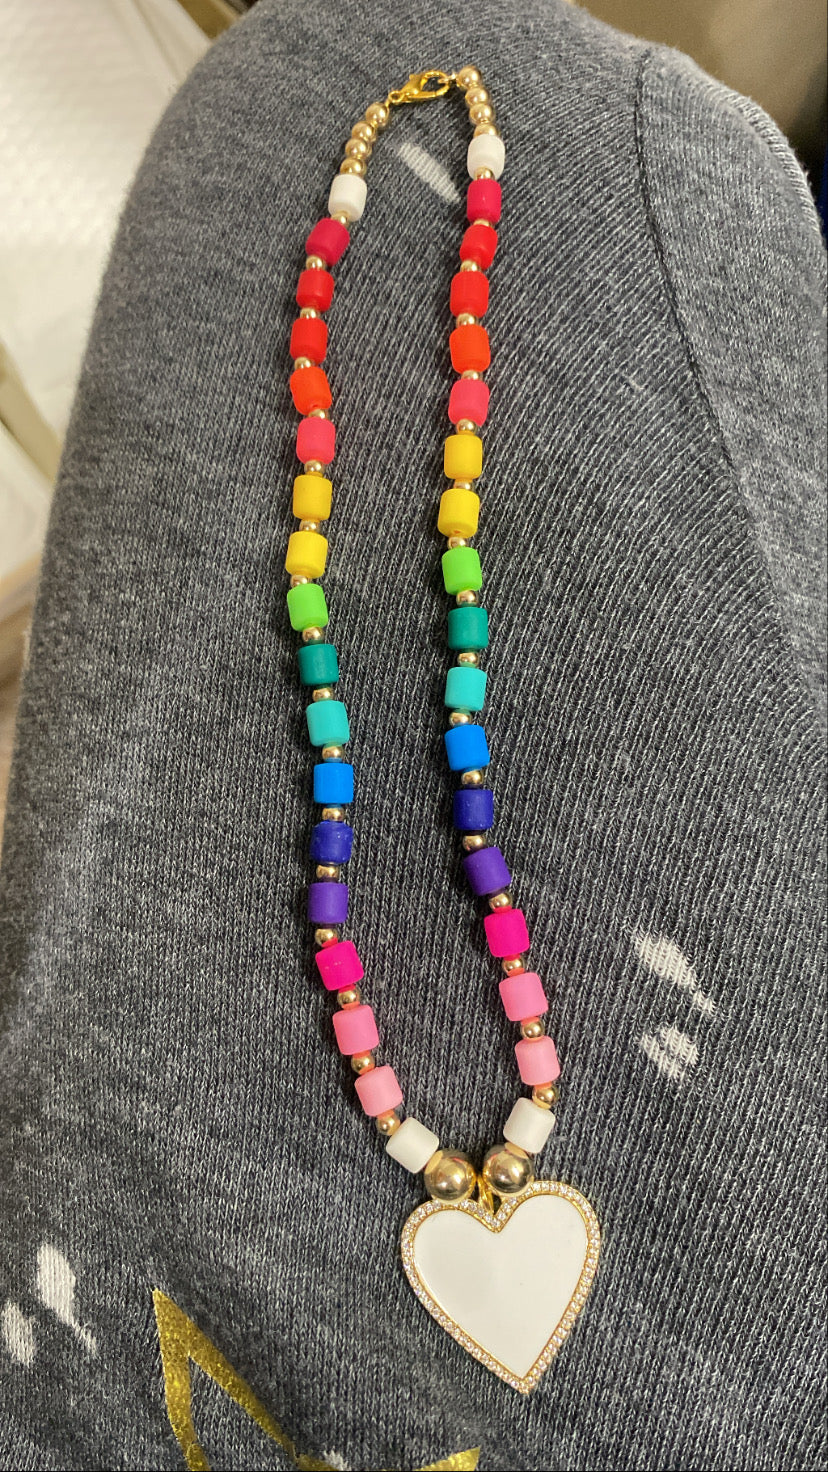 Pearlygirly necklace